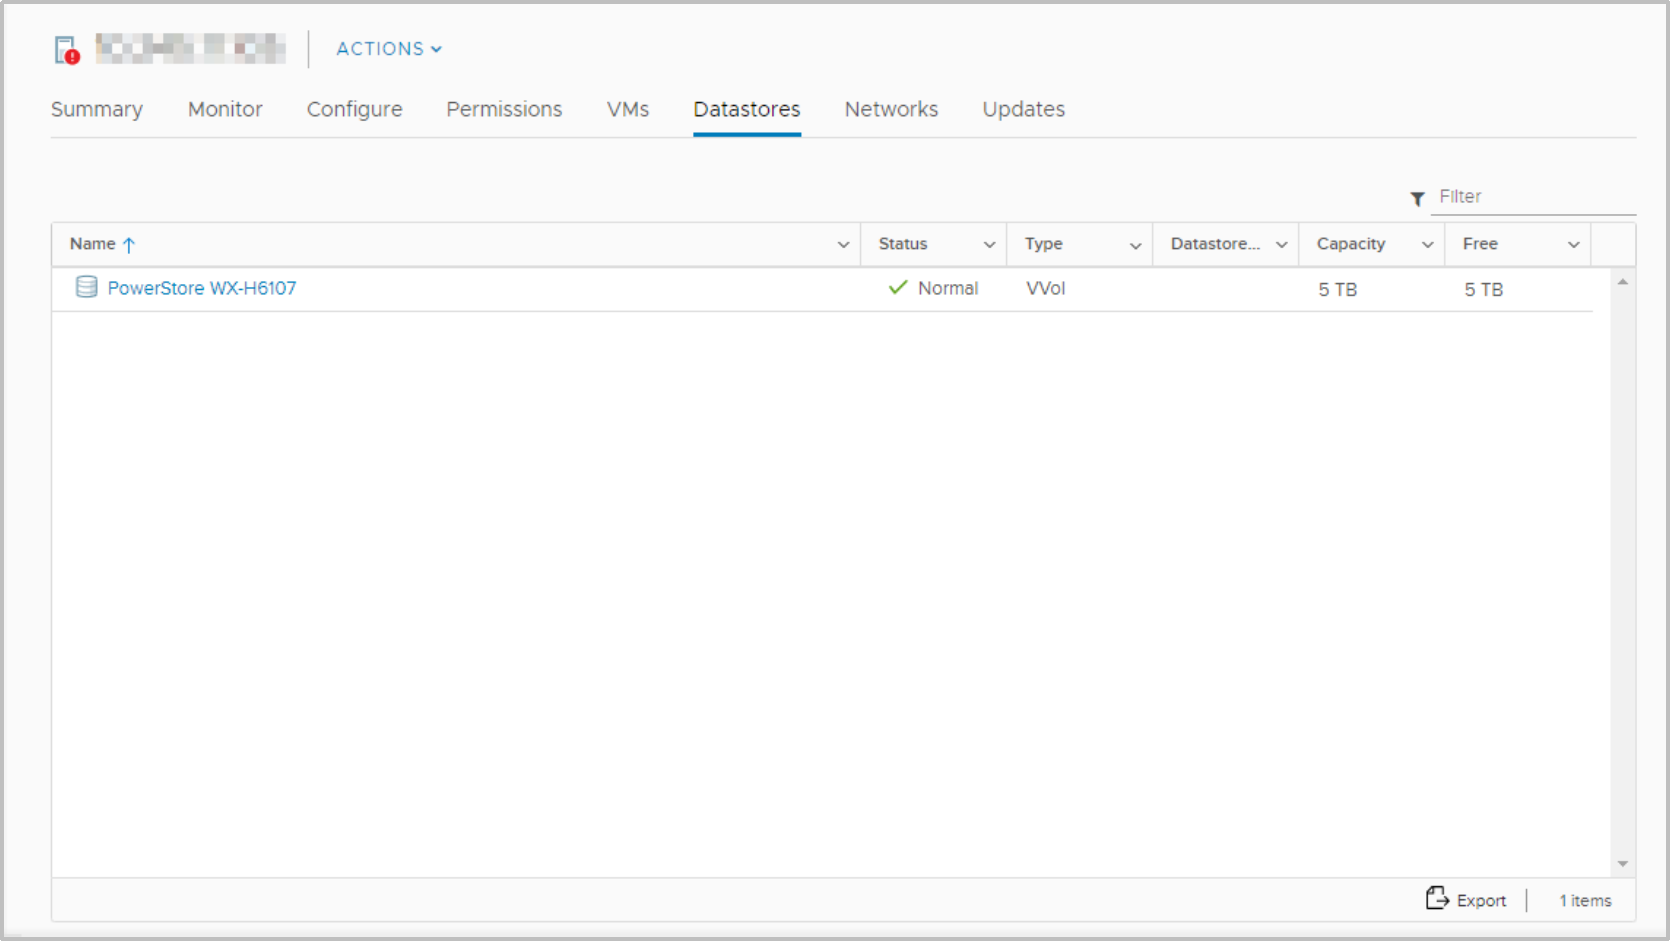 A screenshot of vCenter showing the mounted PowerStore vVol datastore that has a quota applied.